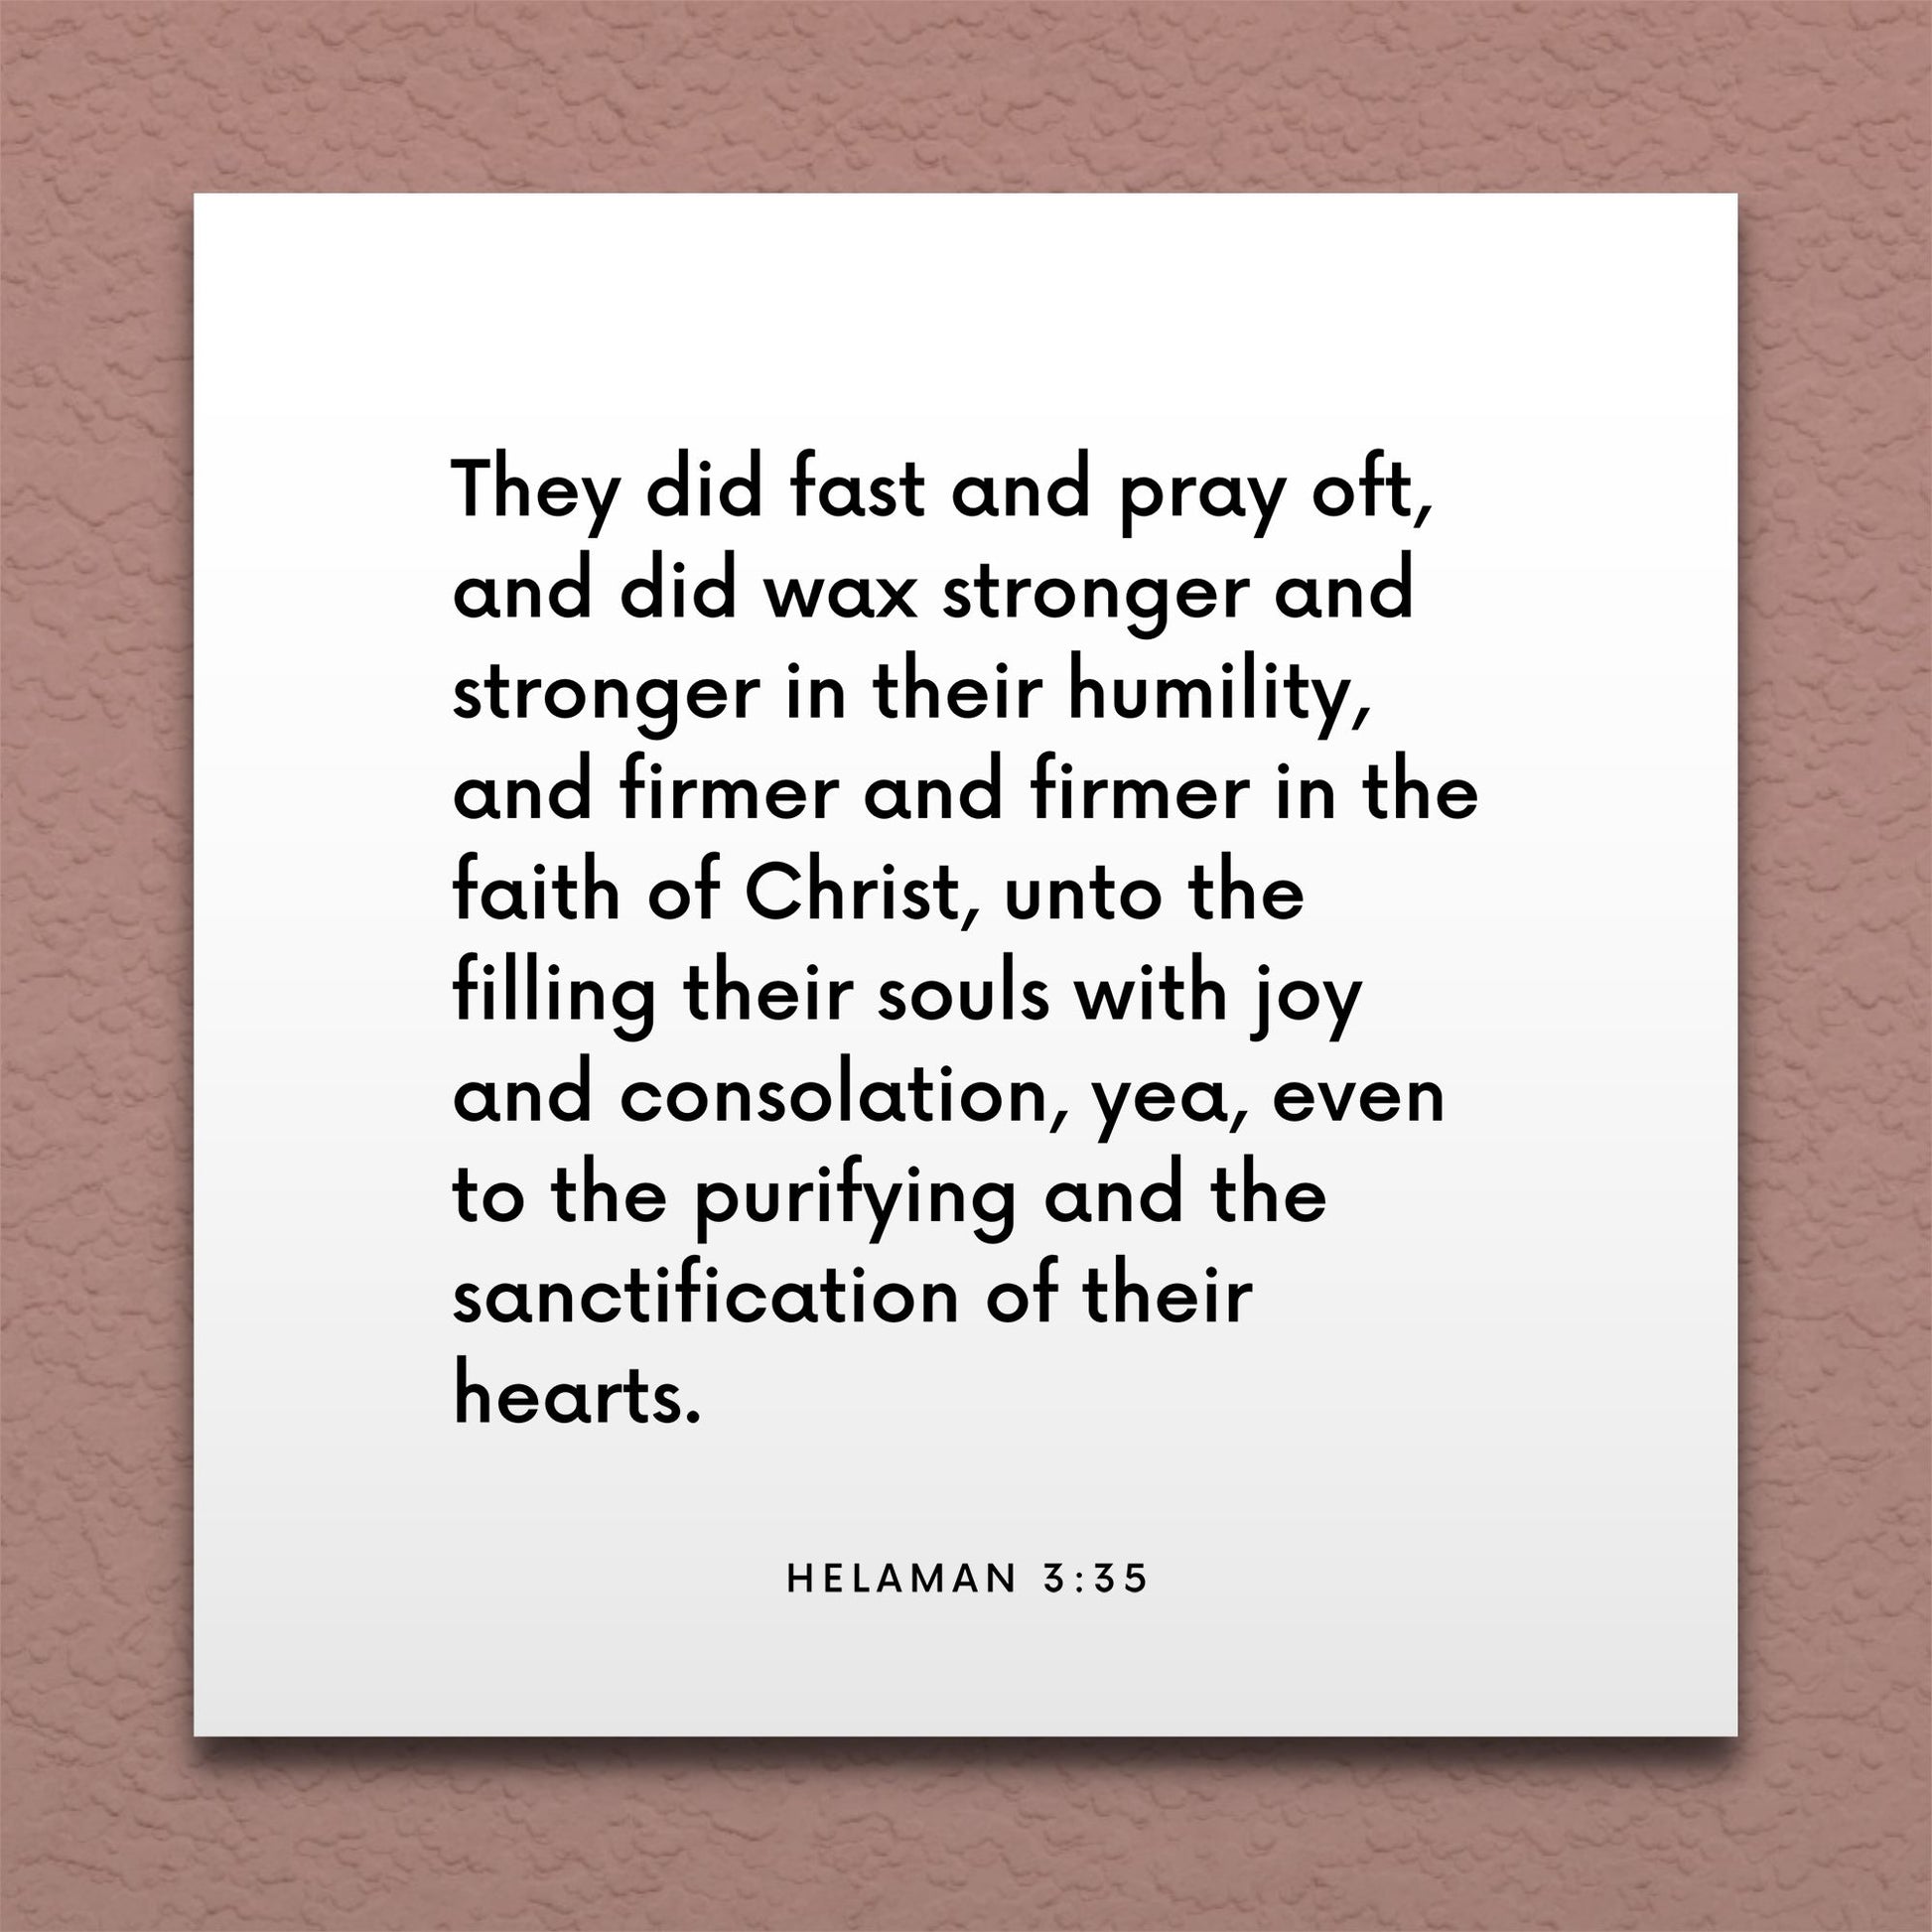 Wall-mounted scripture tile for Helaman 3:35 - "They did fast and pray oft, and did wax stronger"